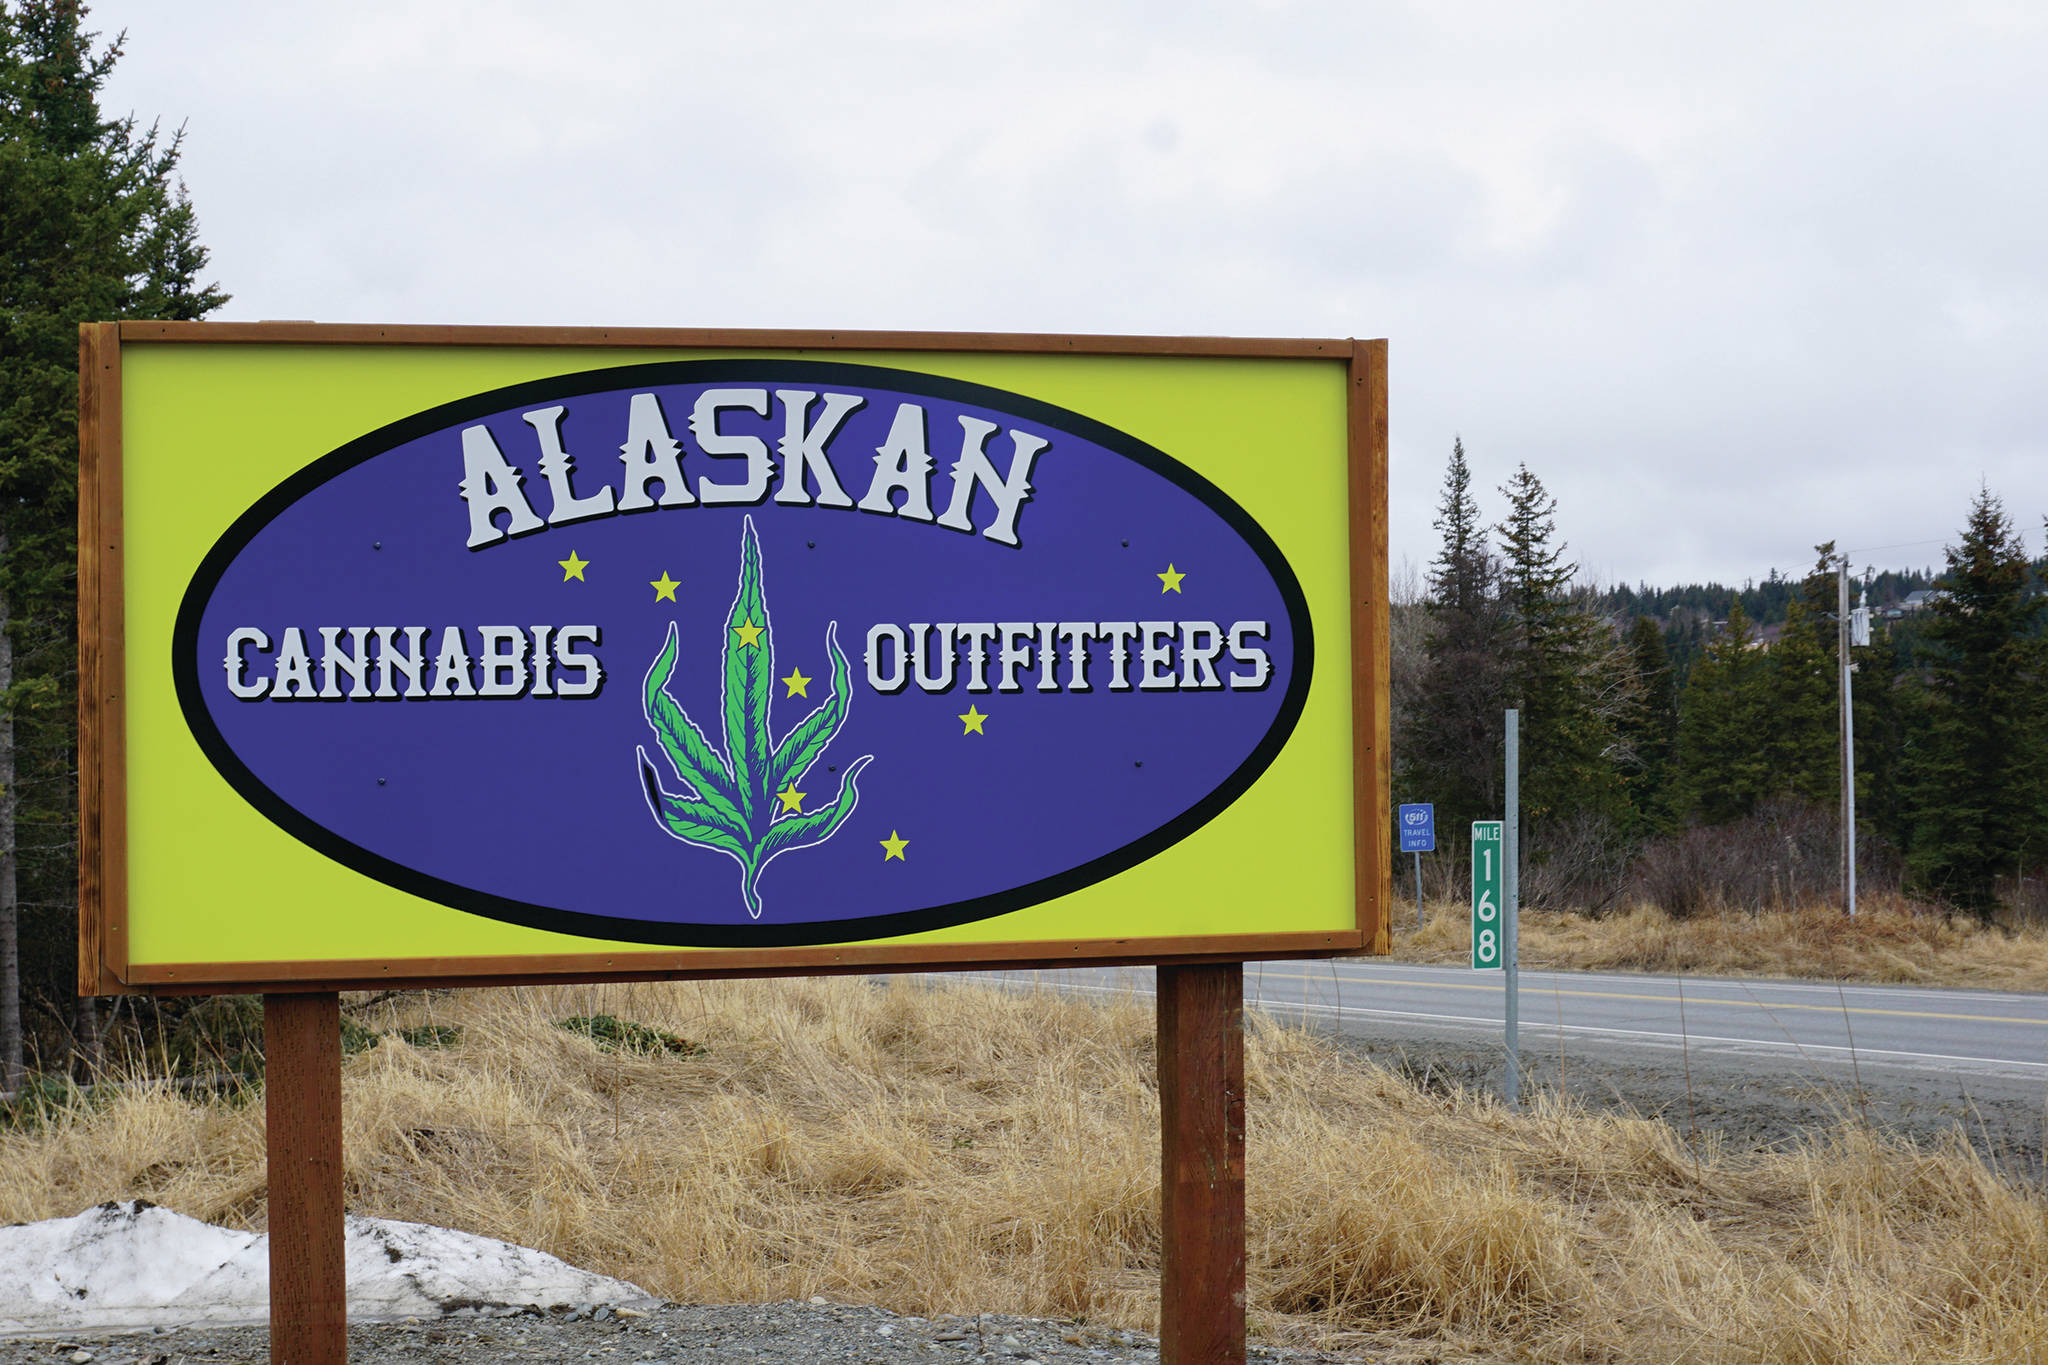 Alaskan Cannabis Outfitters, a new cannabis retail store, is located right at Mile 168 Sterling Highway just before the road turns toward Baycrest Hill. The store opened on 4/20 — April 20, 2020 — in Homer, Alaska. (Photo by Michael Armstrong/Homer News)